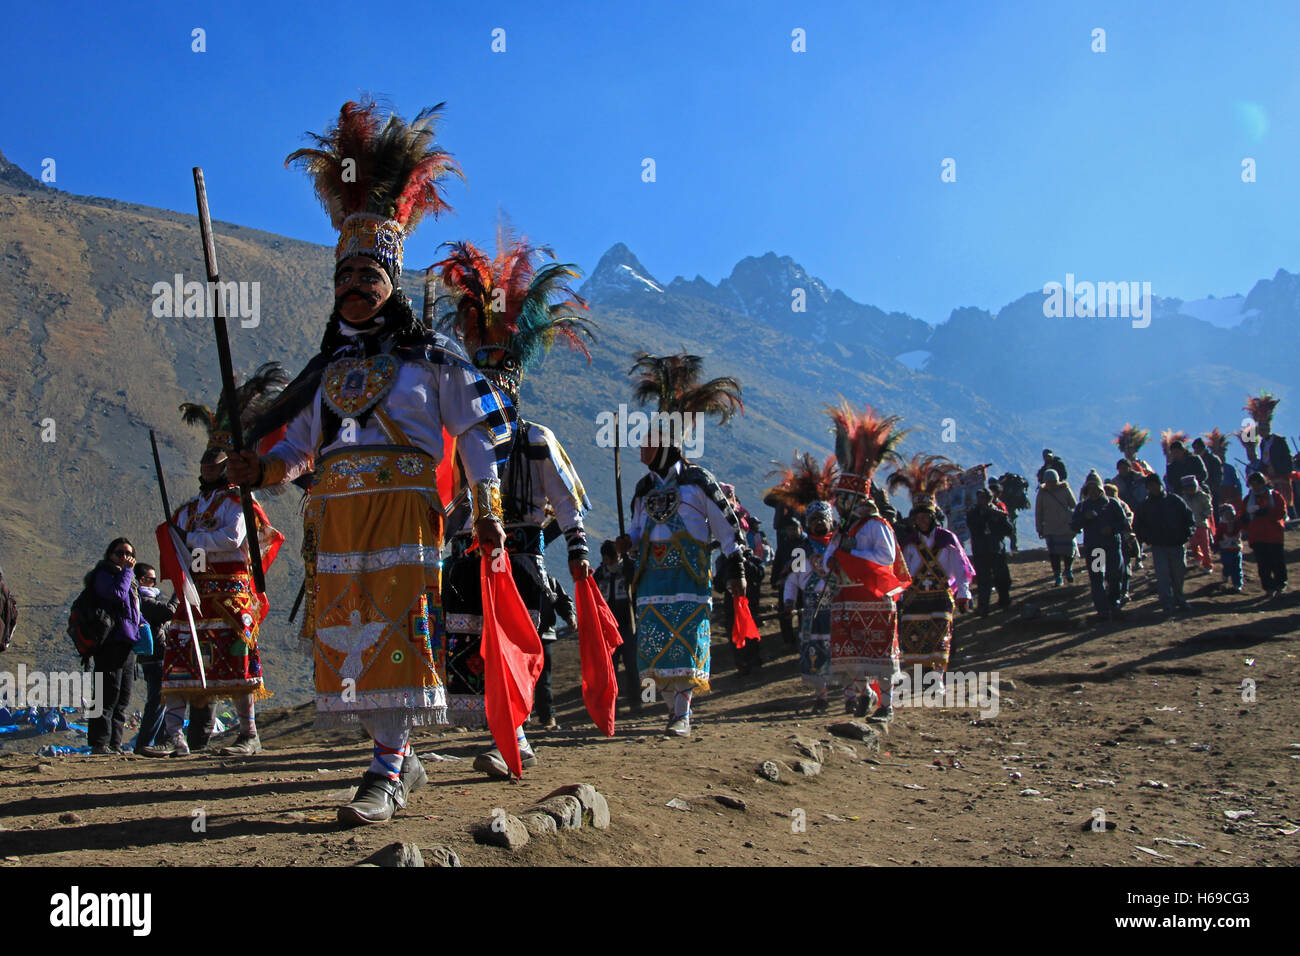 Parade at Quyllurit'i inca festival in the peruvian andes near ausangate mountain. Stock Photo